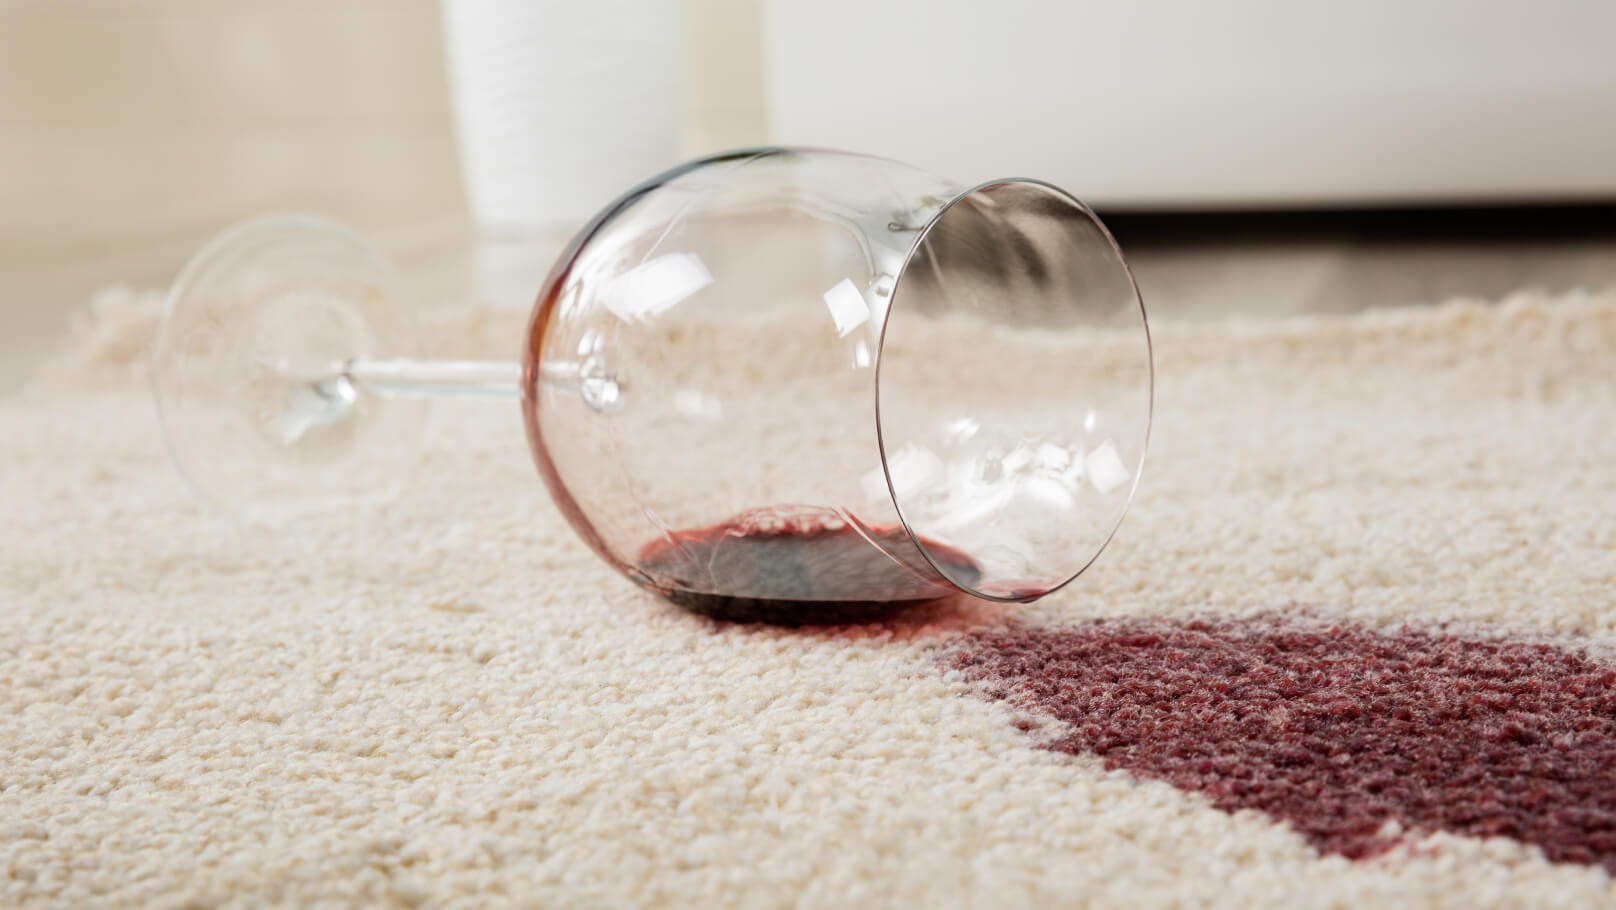 Wine glass on its side with red wine spilling out from the glass on to a white carpet